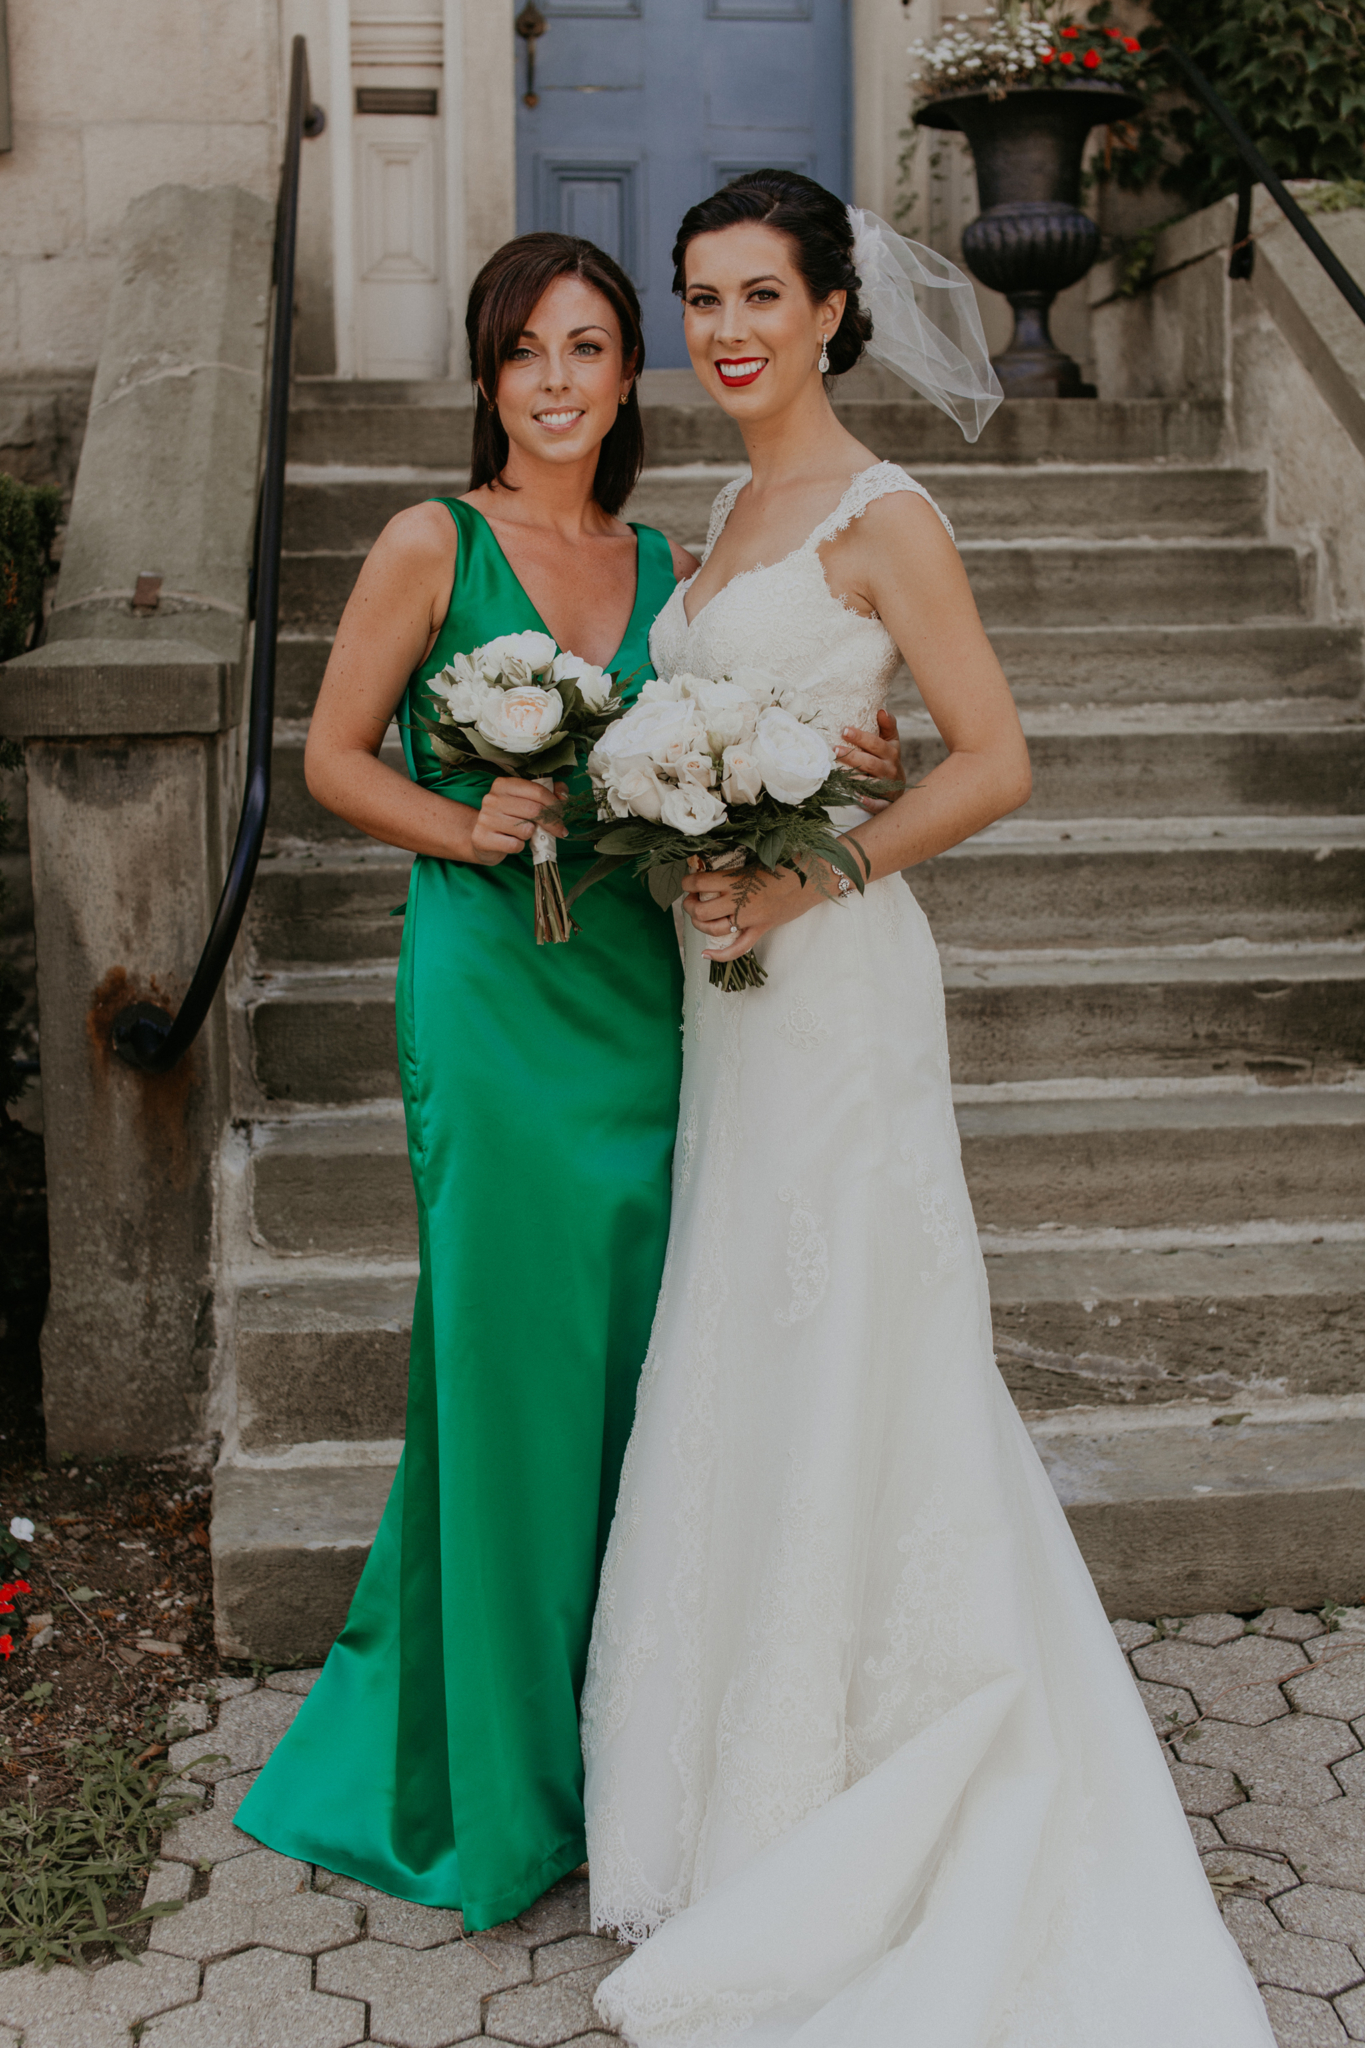 Portrait of bride with bridesmaid in green dress